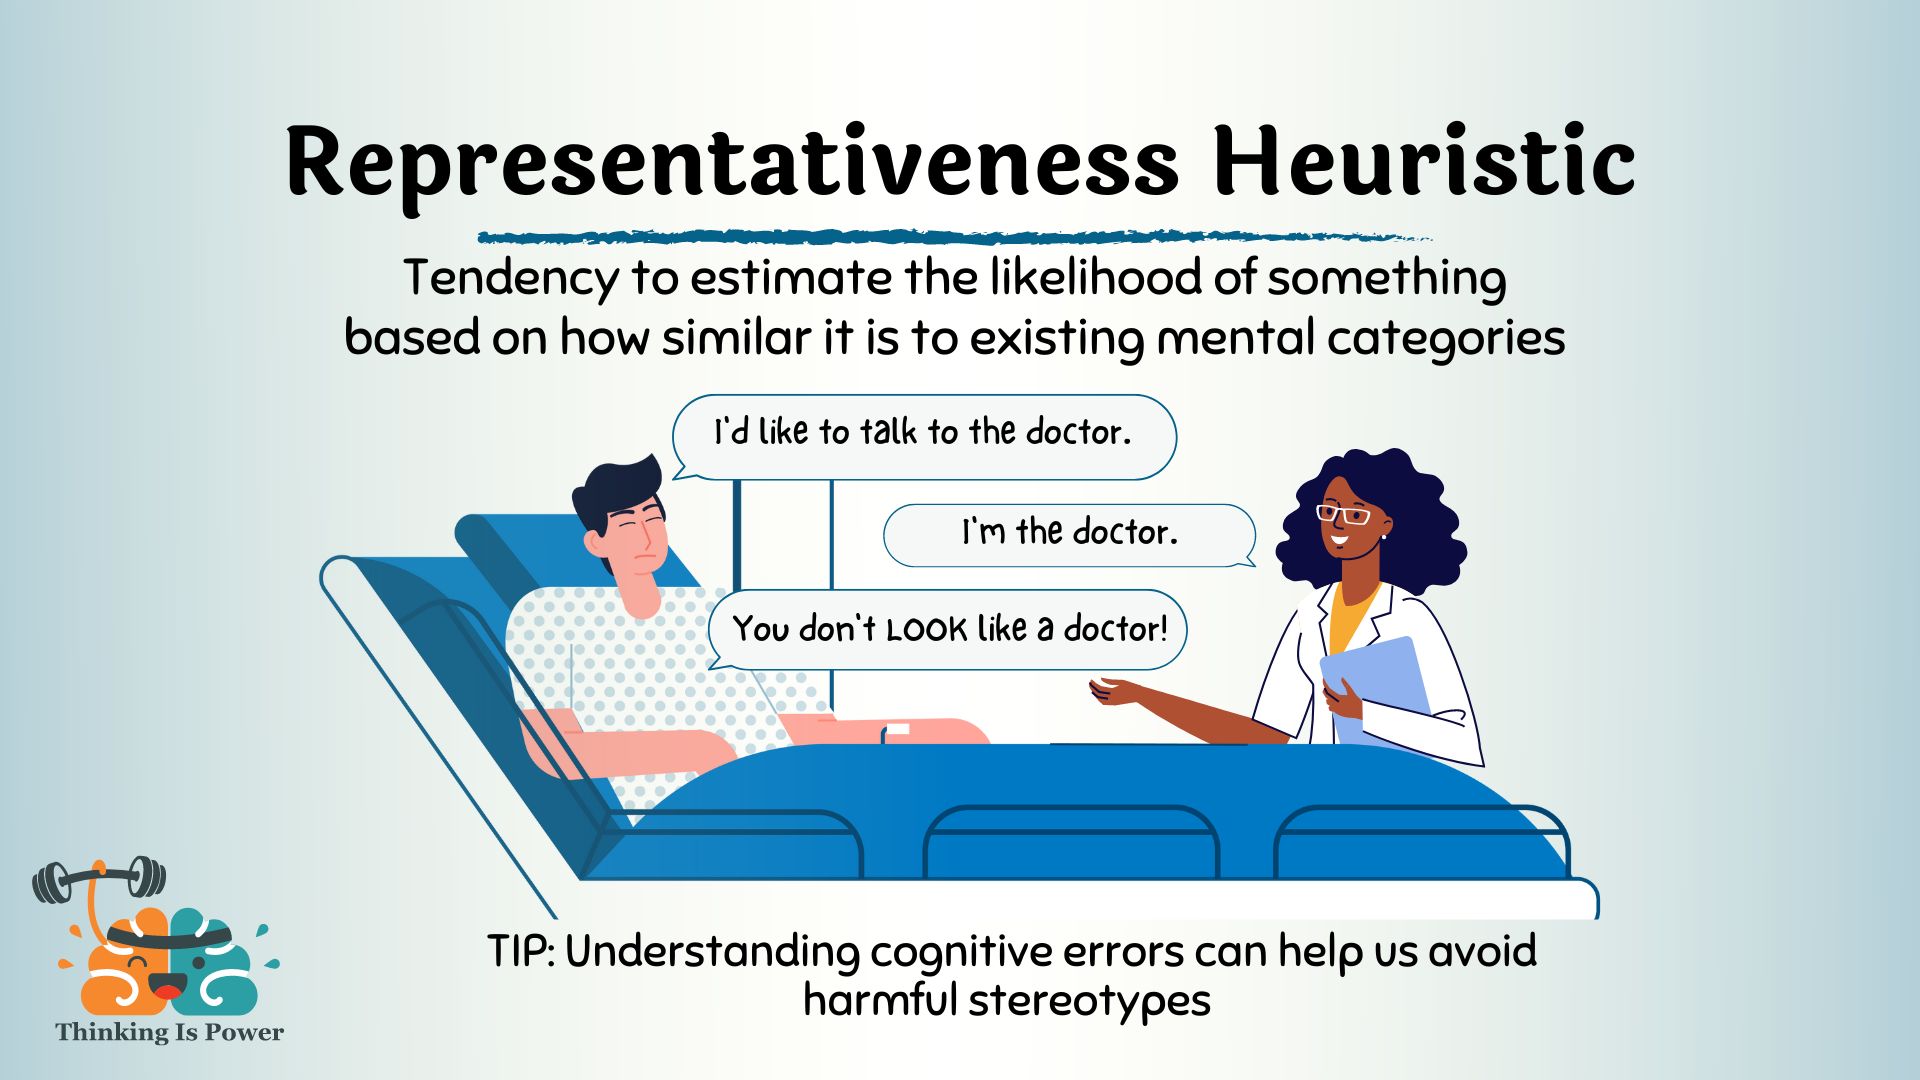 Representativeness heuristic is the tendency to estimate the likelihood of something based on how similar it is to existing mental categories. Shown is a man in a hospital bed talking to a Black female doctor. He says, "I'd like to talk to the doctor." She responds, "I'm the doctor." And he says, "You don't look like a doctor!" Understanding cognitive errors can help us avoid harmful stereotypes.